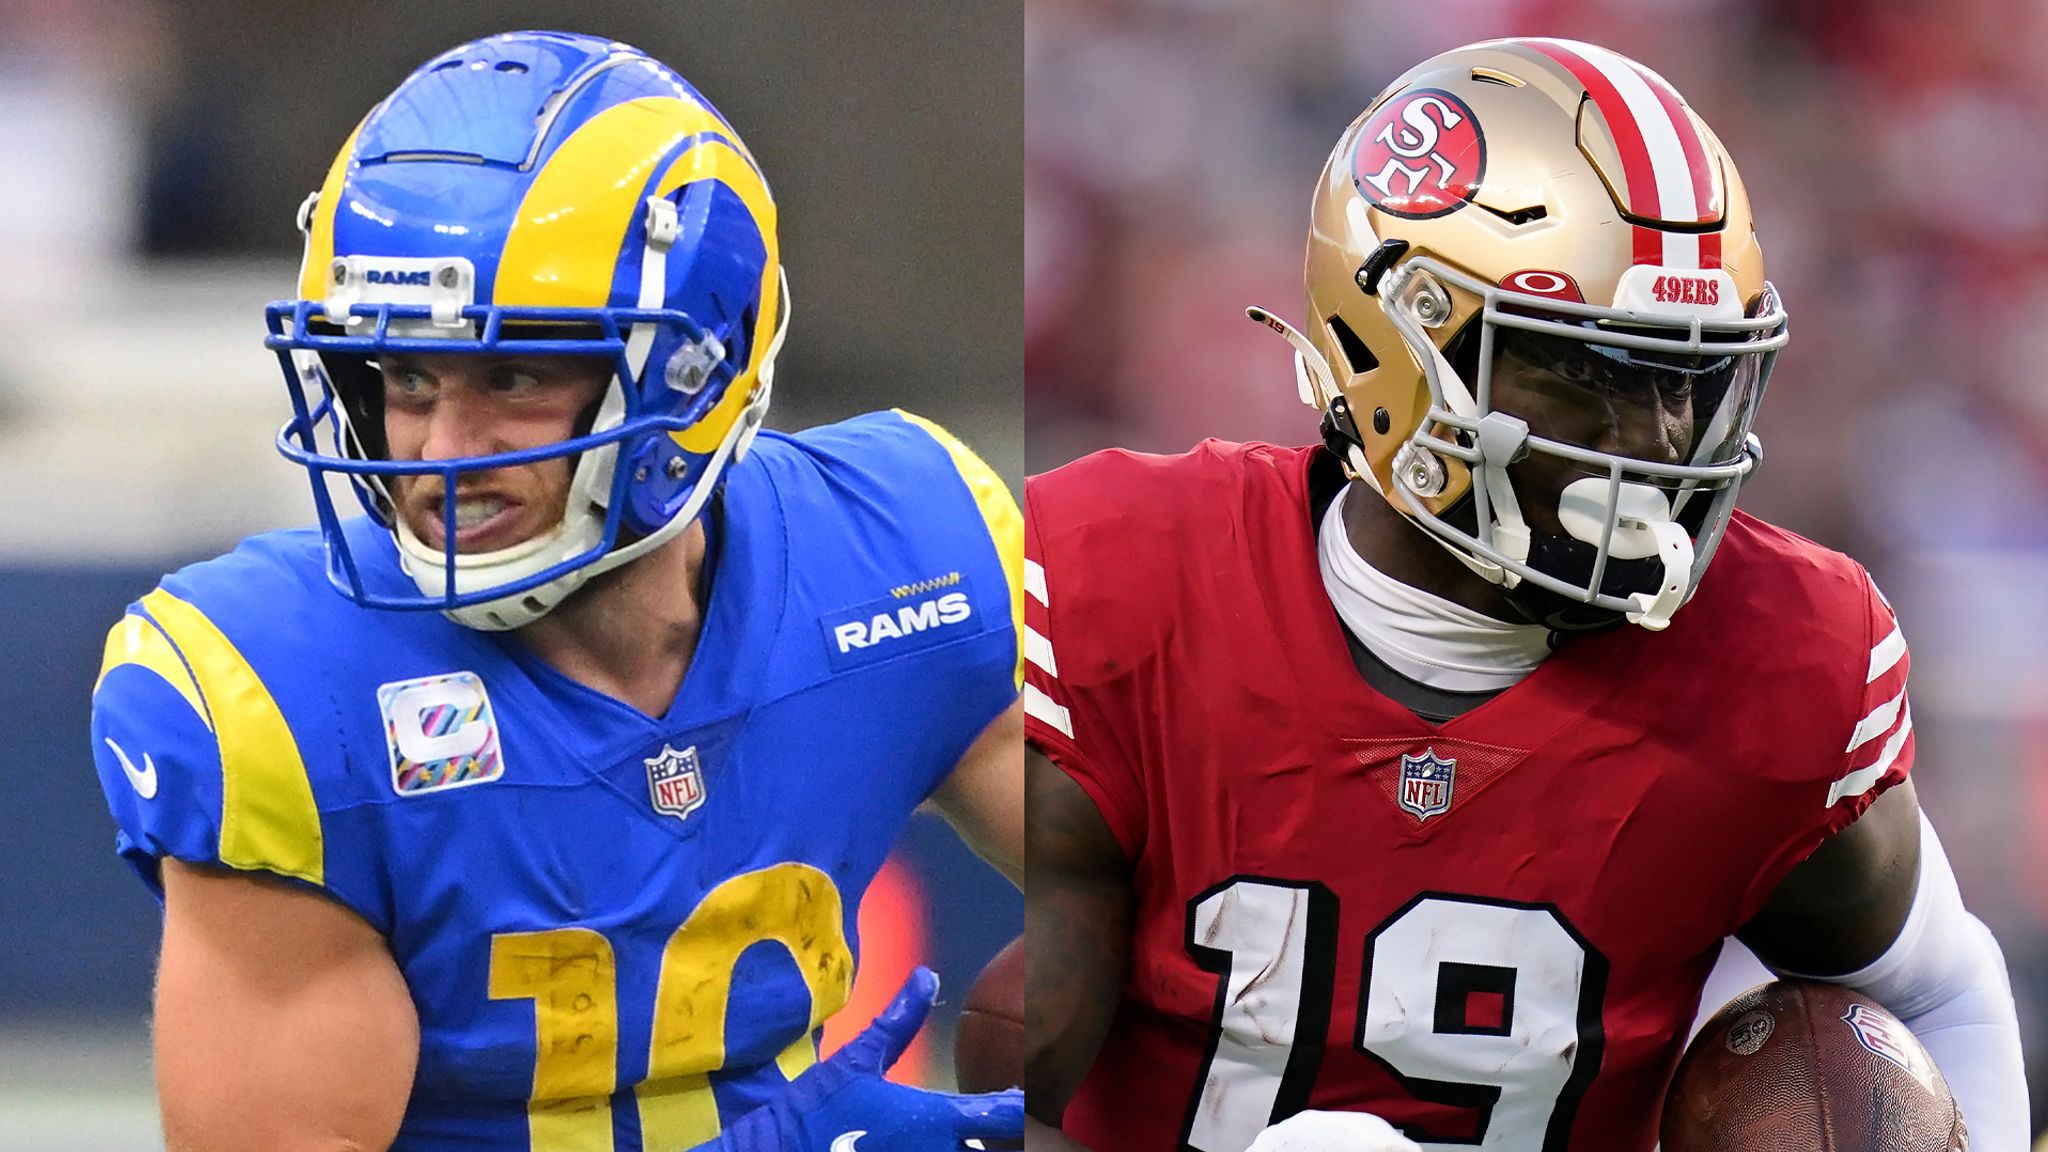 rams vs 49ers when do they play